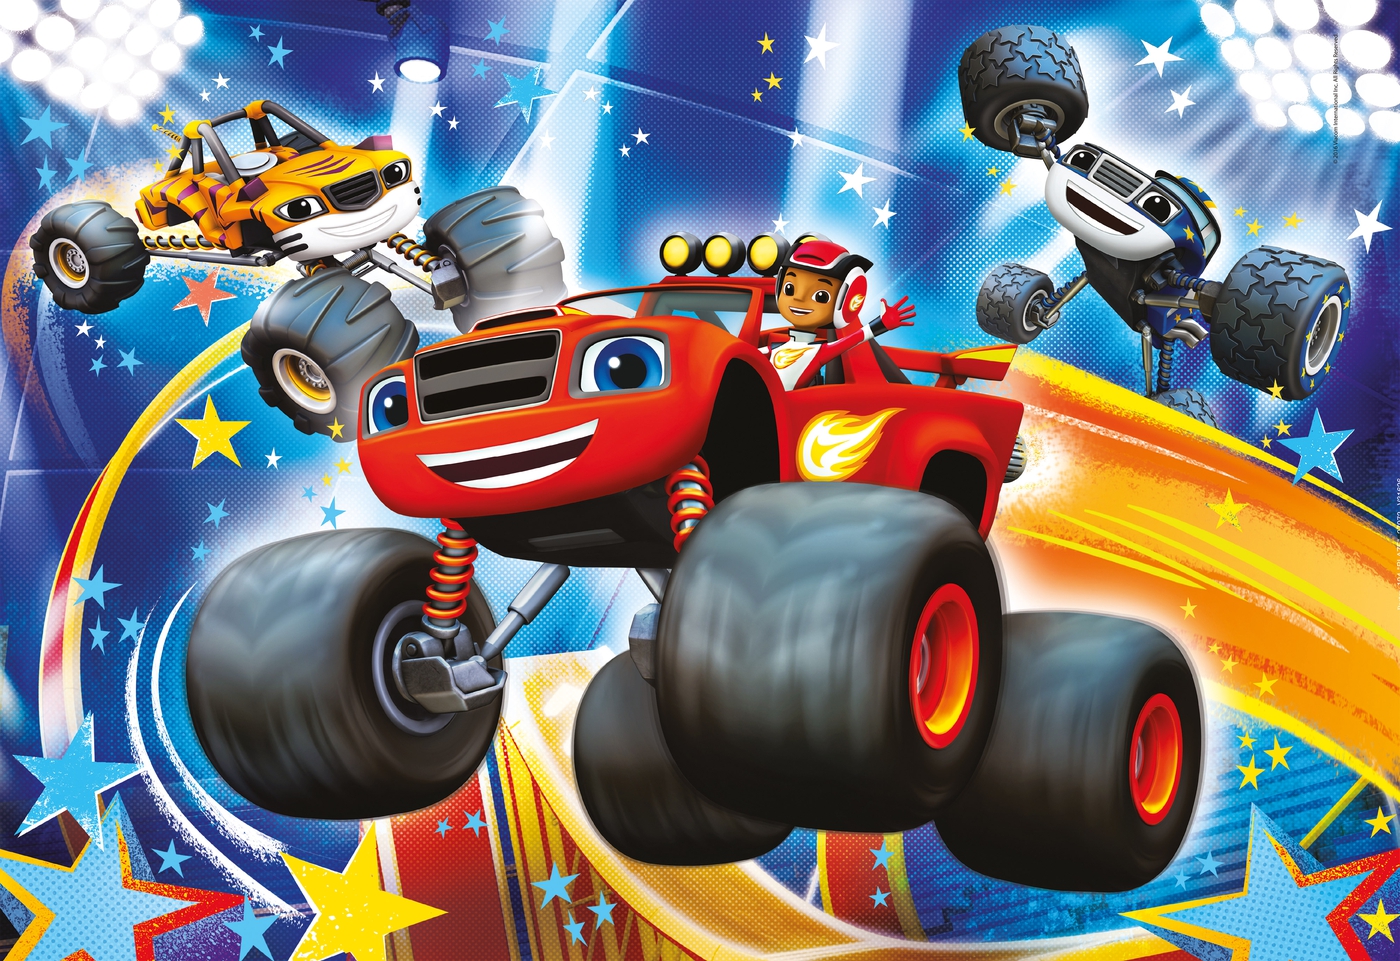 Nickelodeon: Blaze and the Monster Machines: High Tire! 